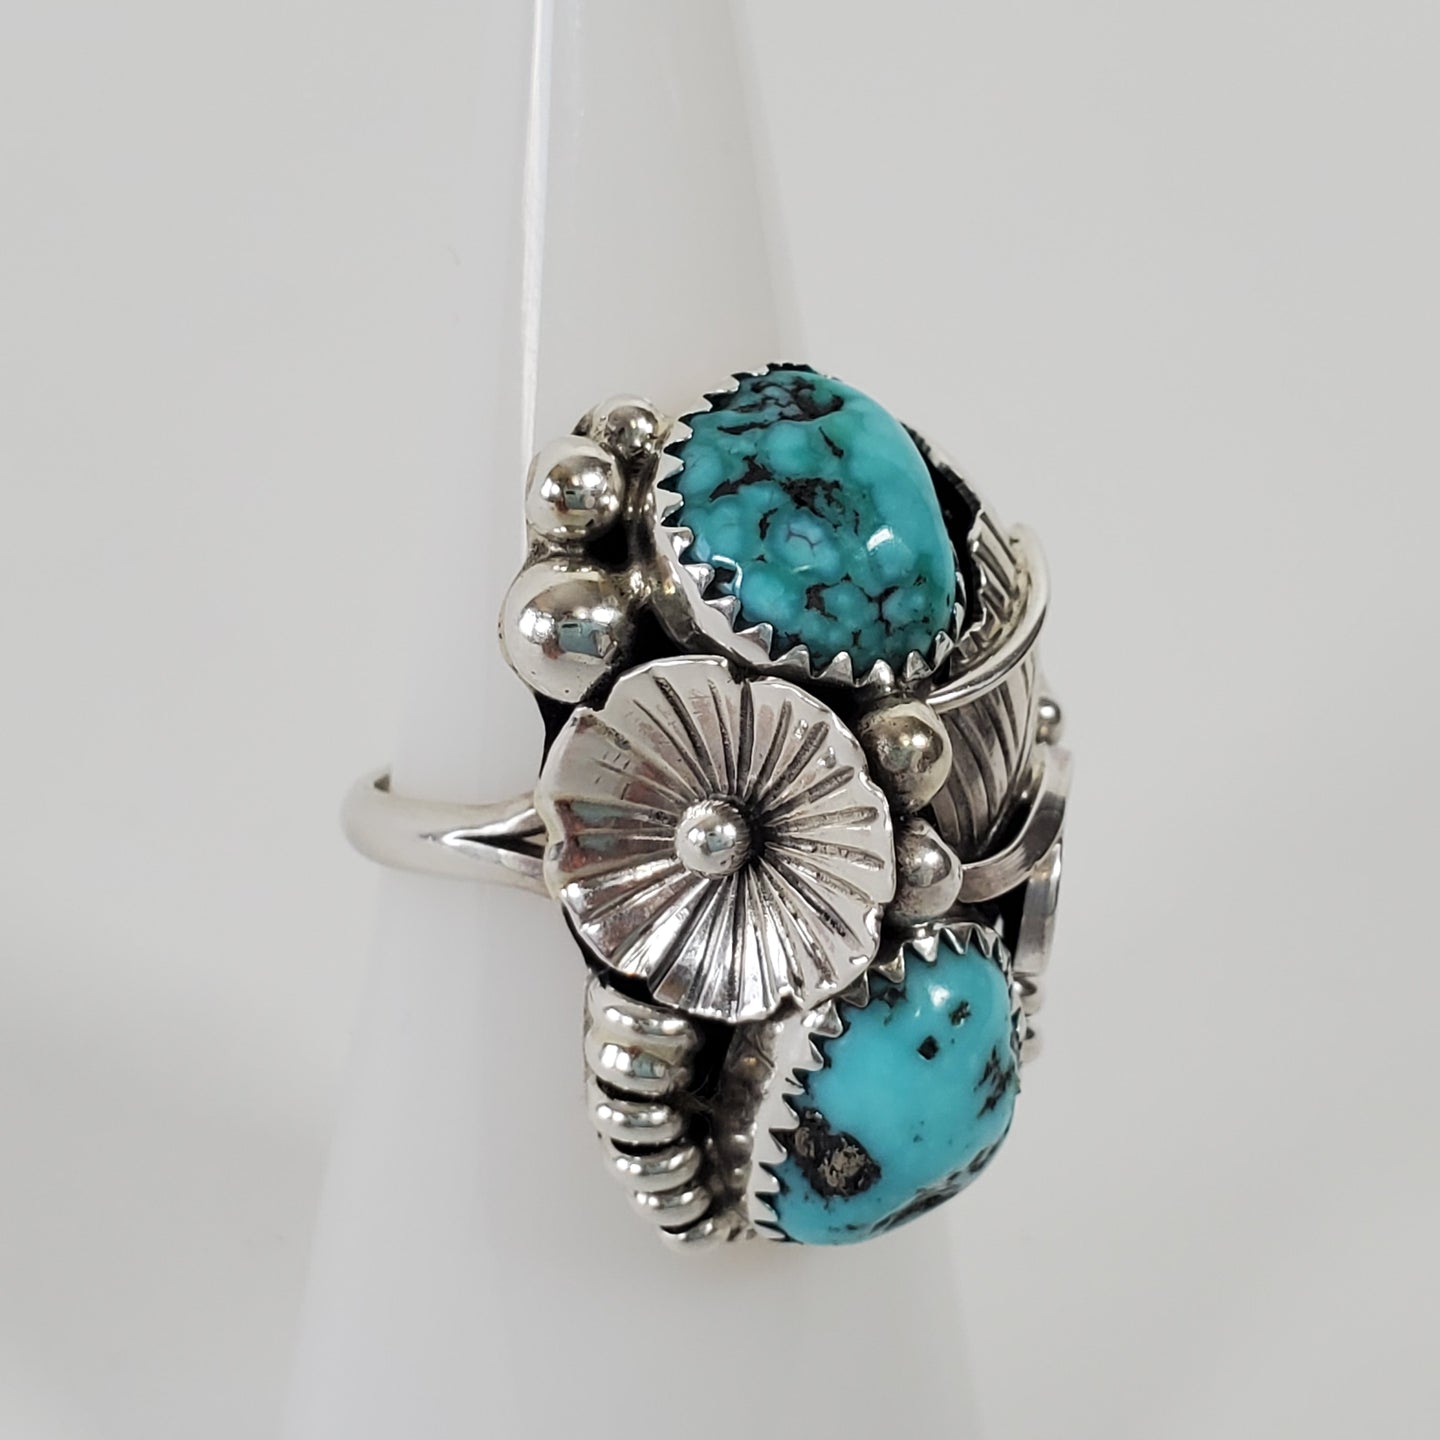 Native American Turquoise Ring 6.5 Sterling Silver Floral Leaf Design